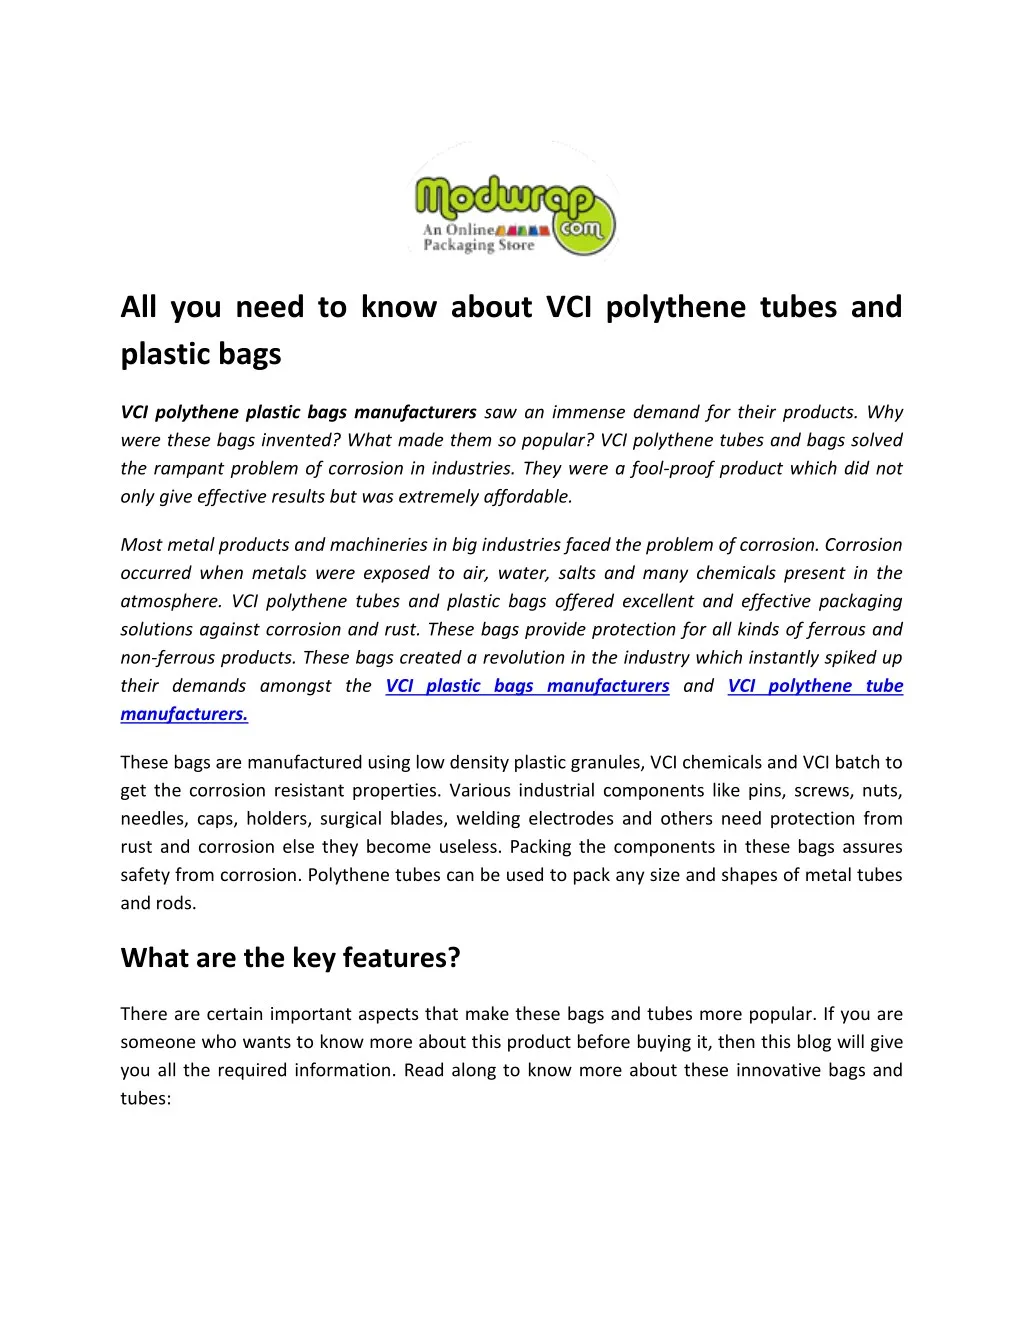 all you need to know about vci polythene tubes